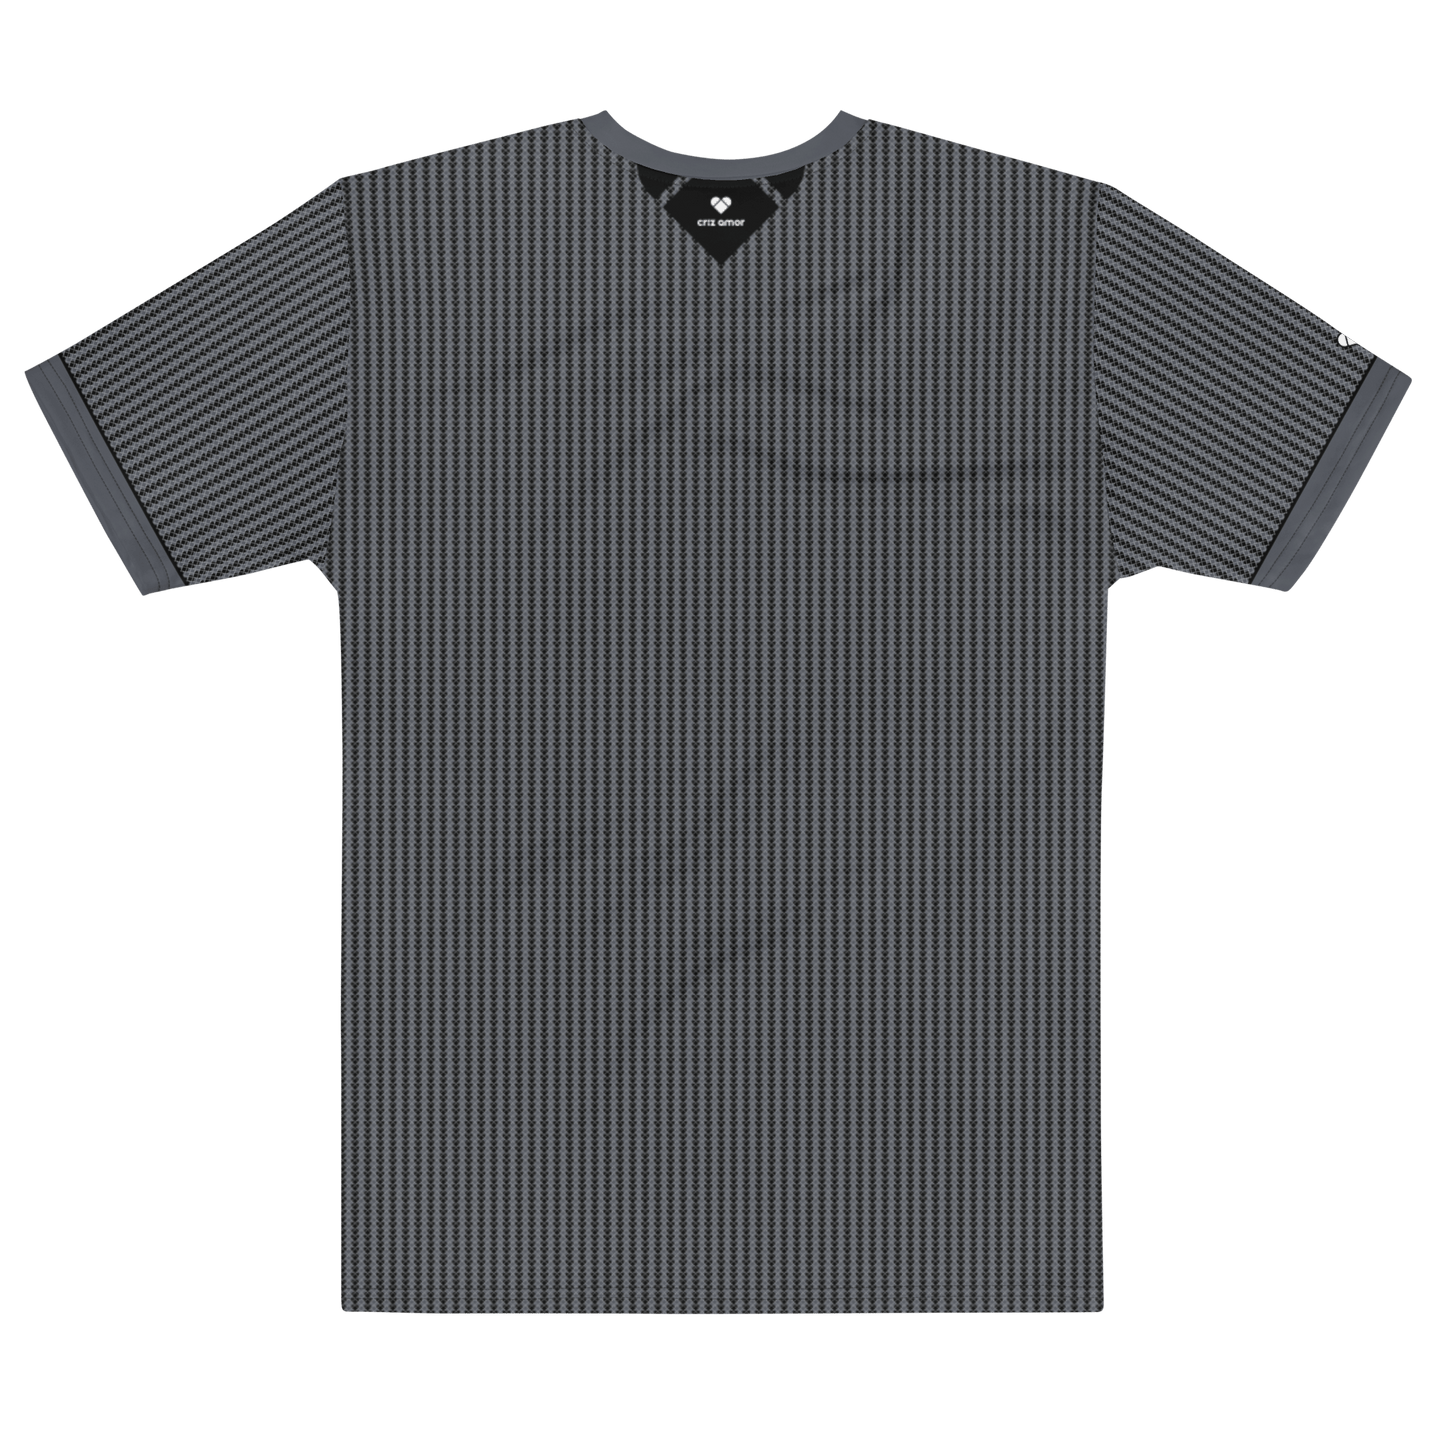 back view Casual wear men's shirt, Black Love Armor with white heart logo and dual shade lovogram pattern